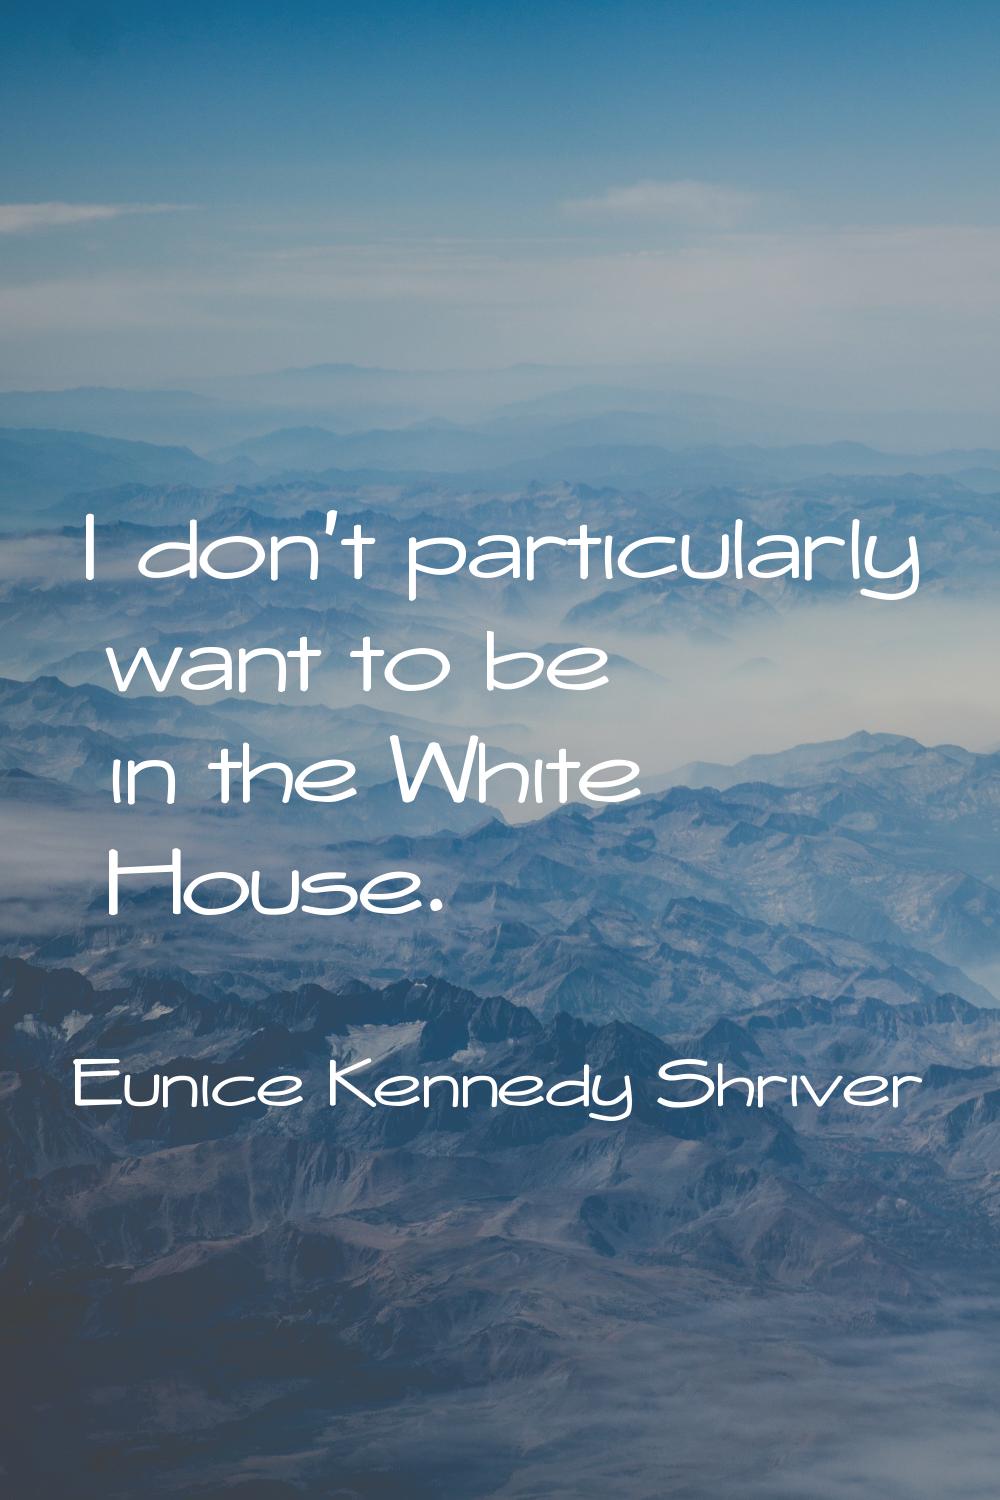 I don't particularly want to be in the White House.